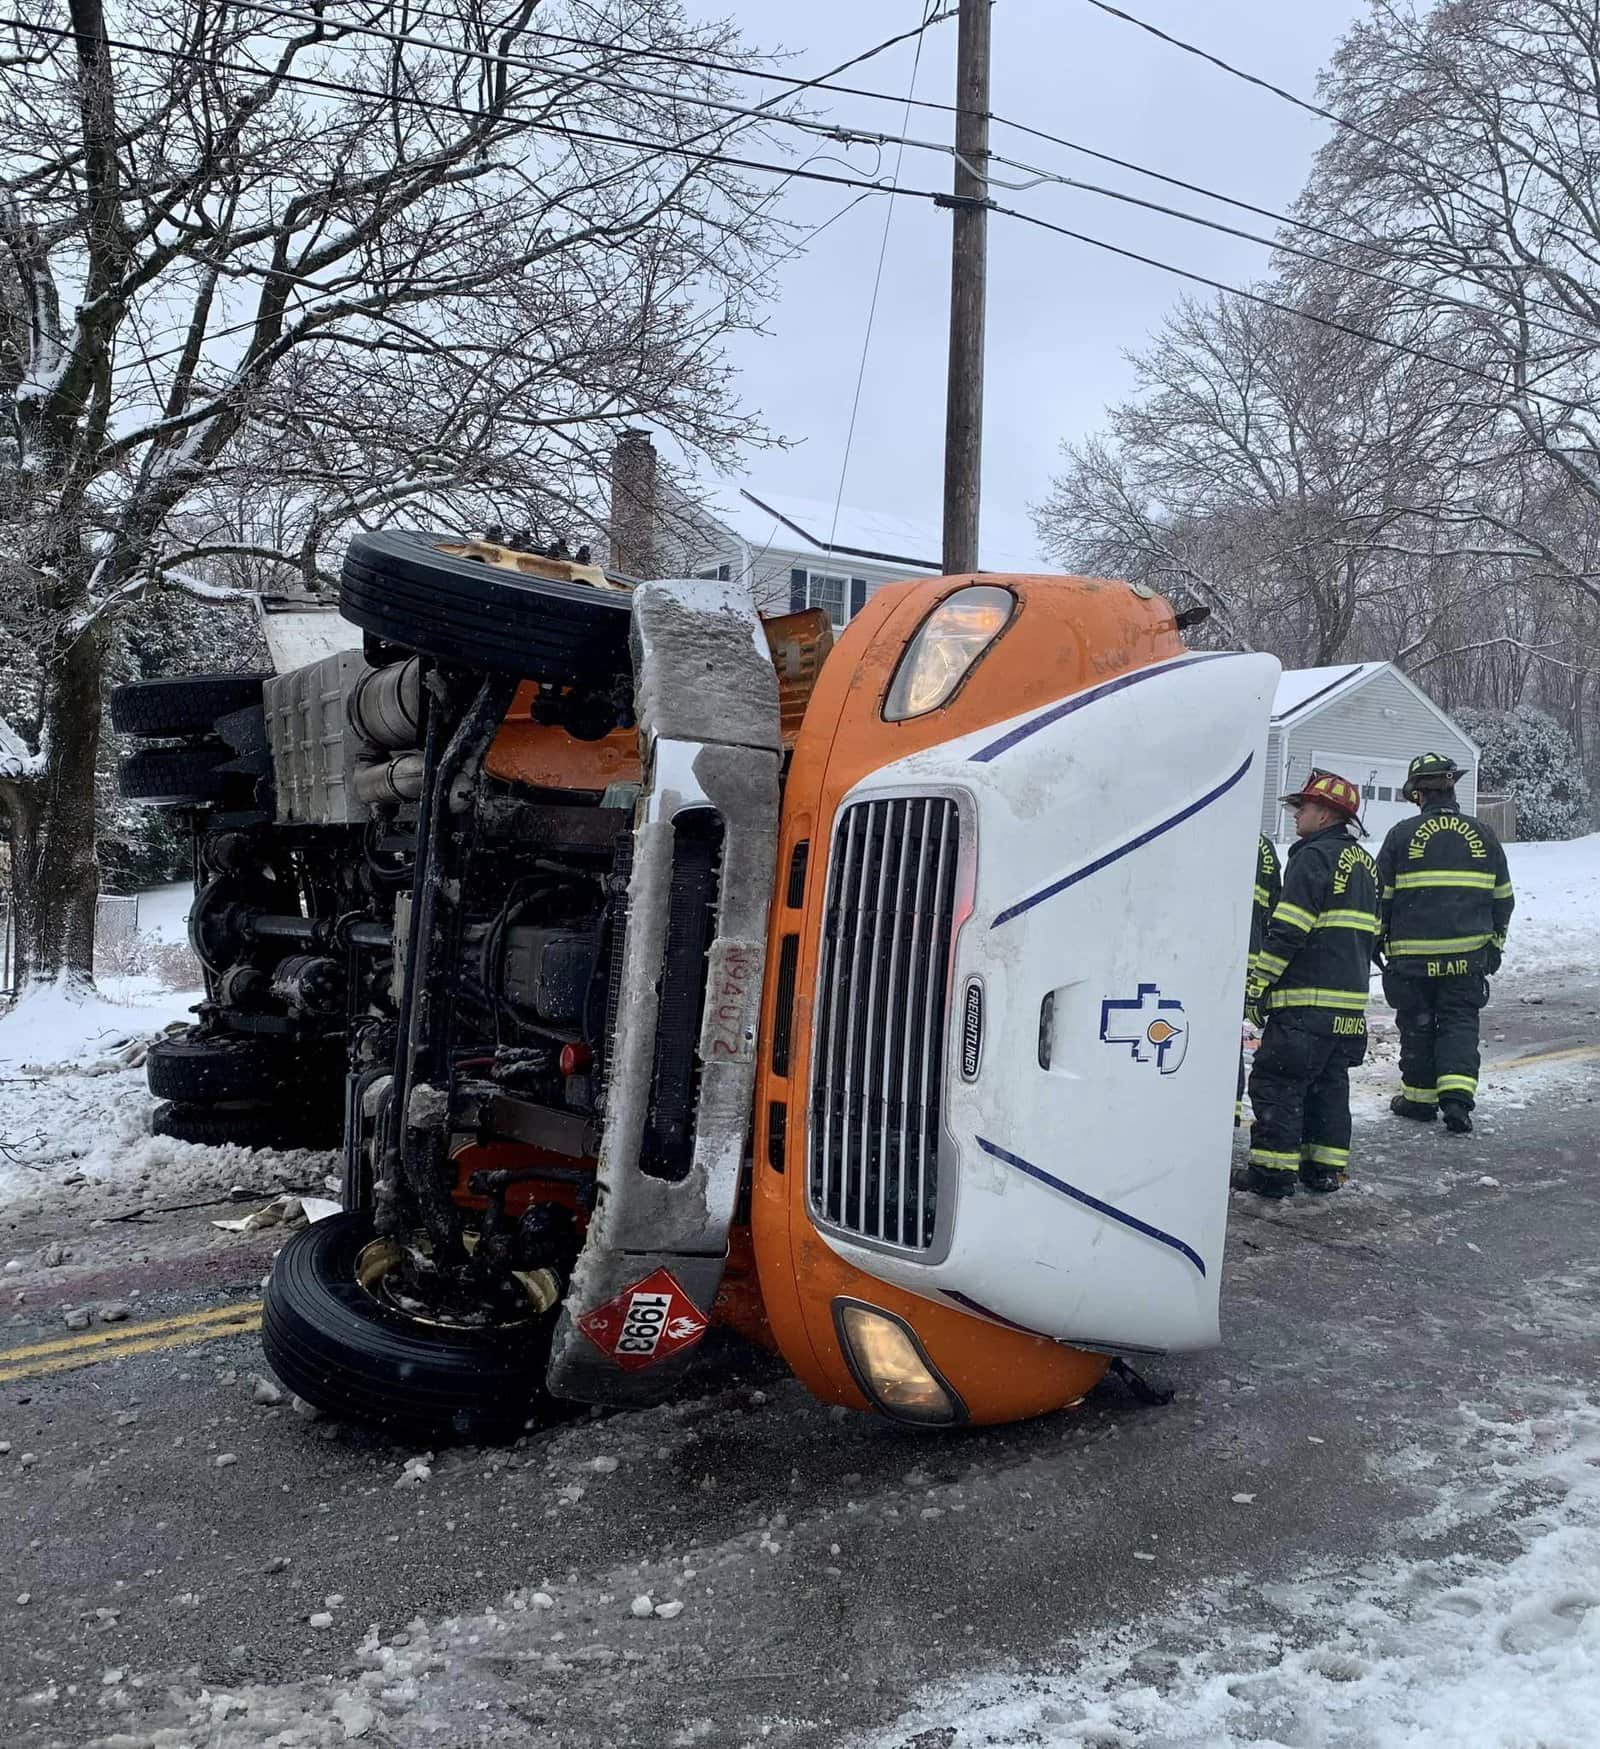 Fuel spilled following oil truck rollover in Westborough